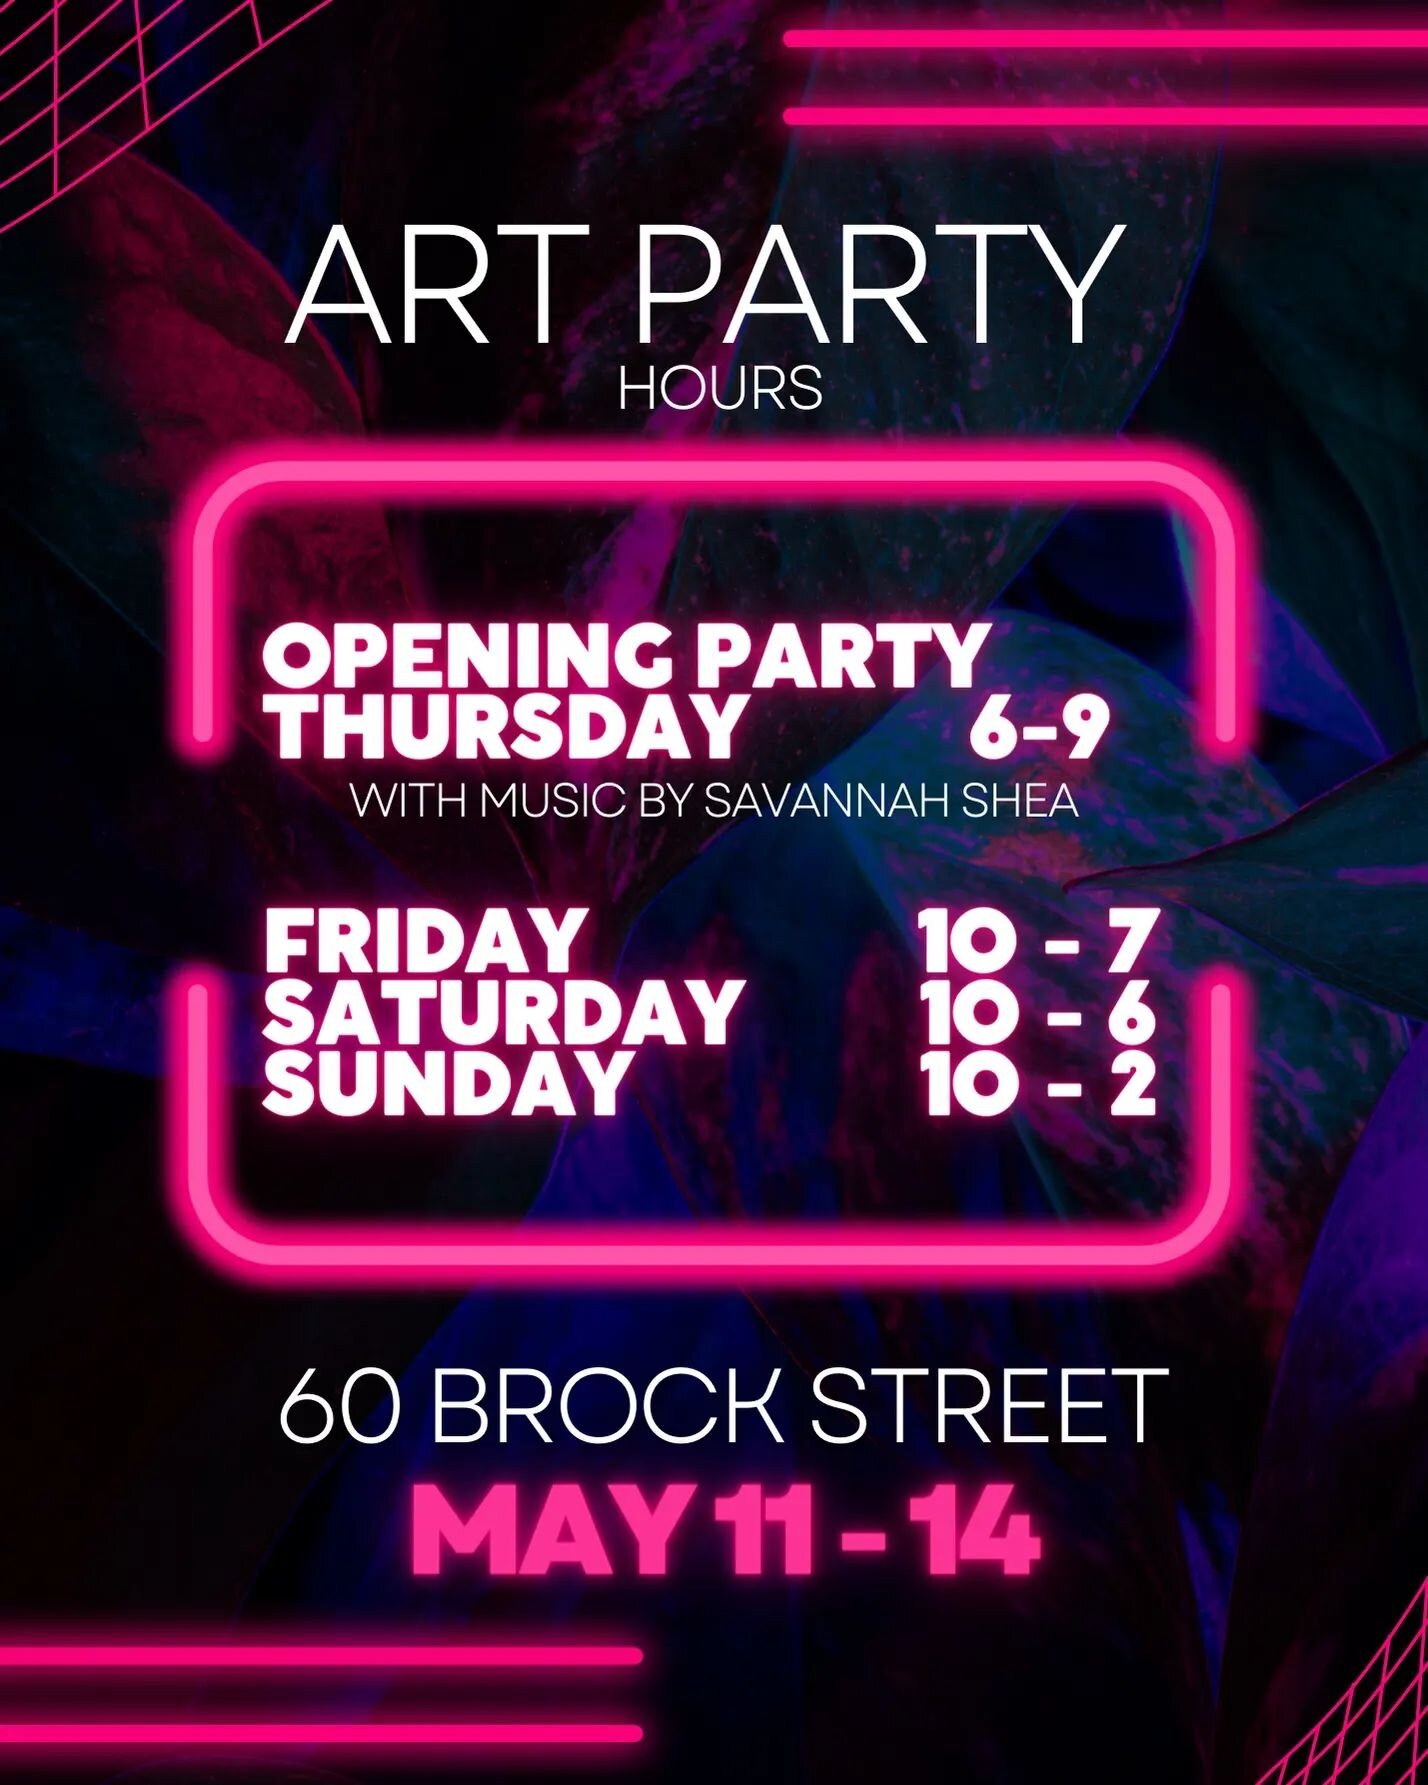 Shop for affordable and local art this weekend! We will be displaying artwork from over 45 local artists at Brock Street.